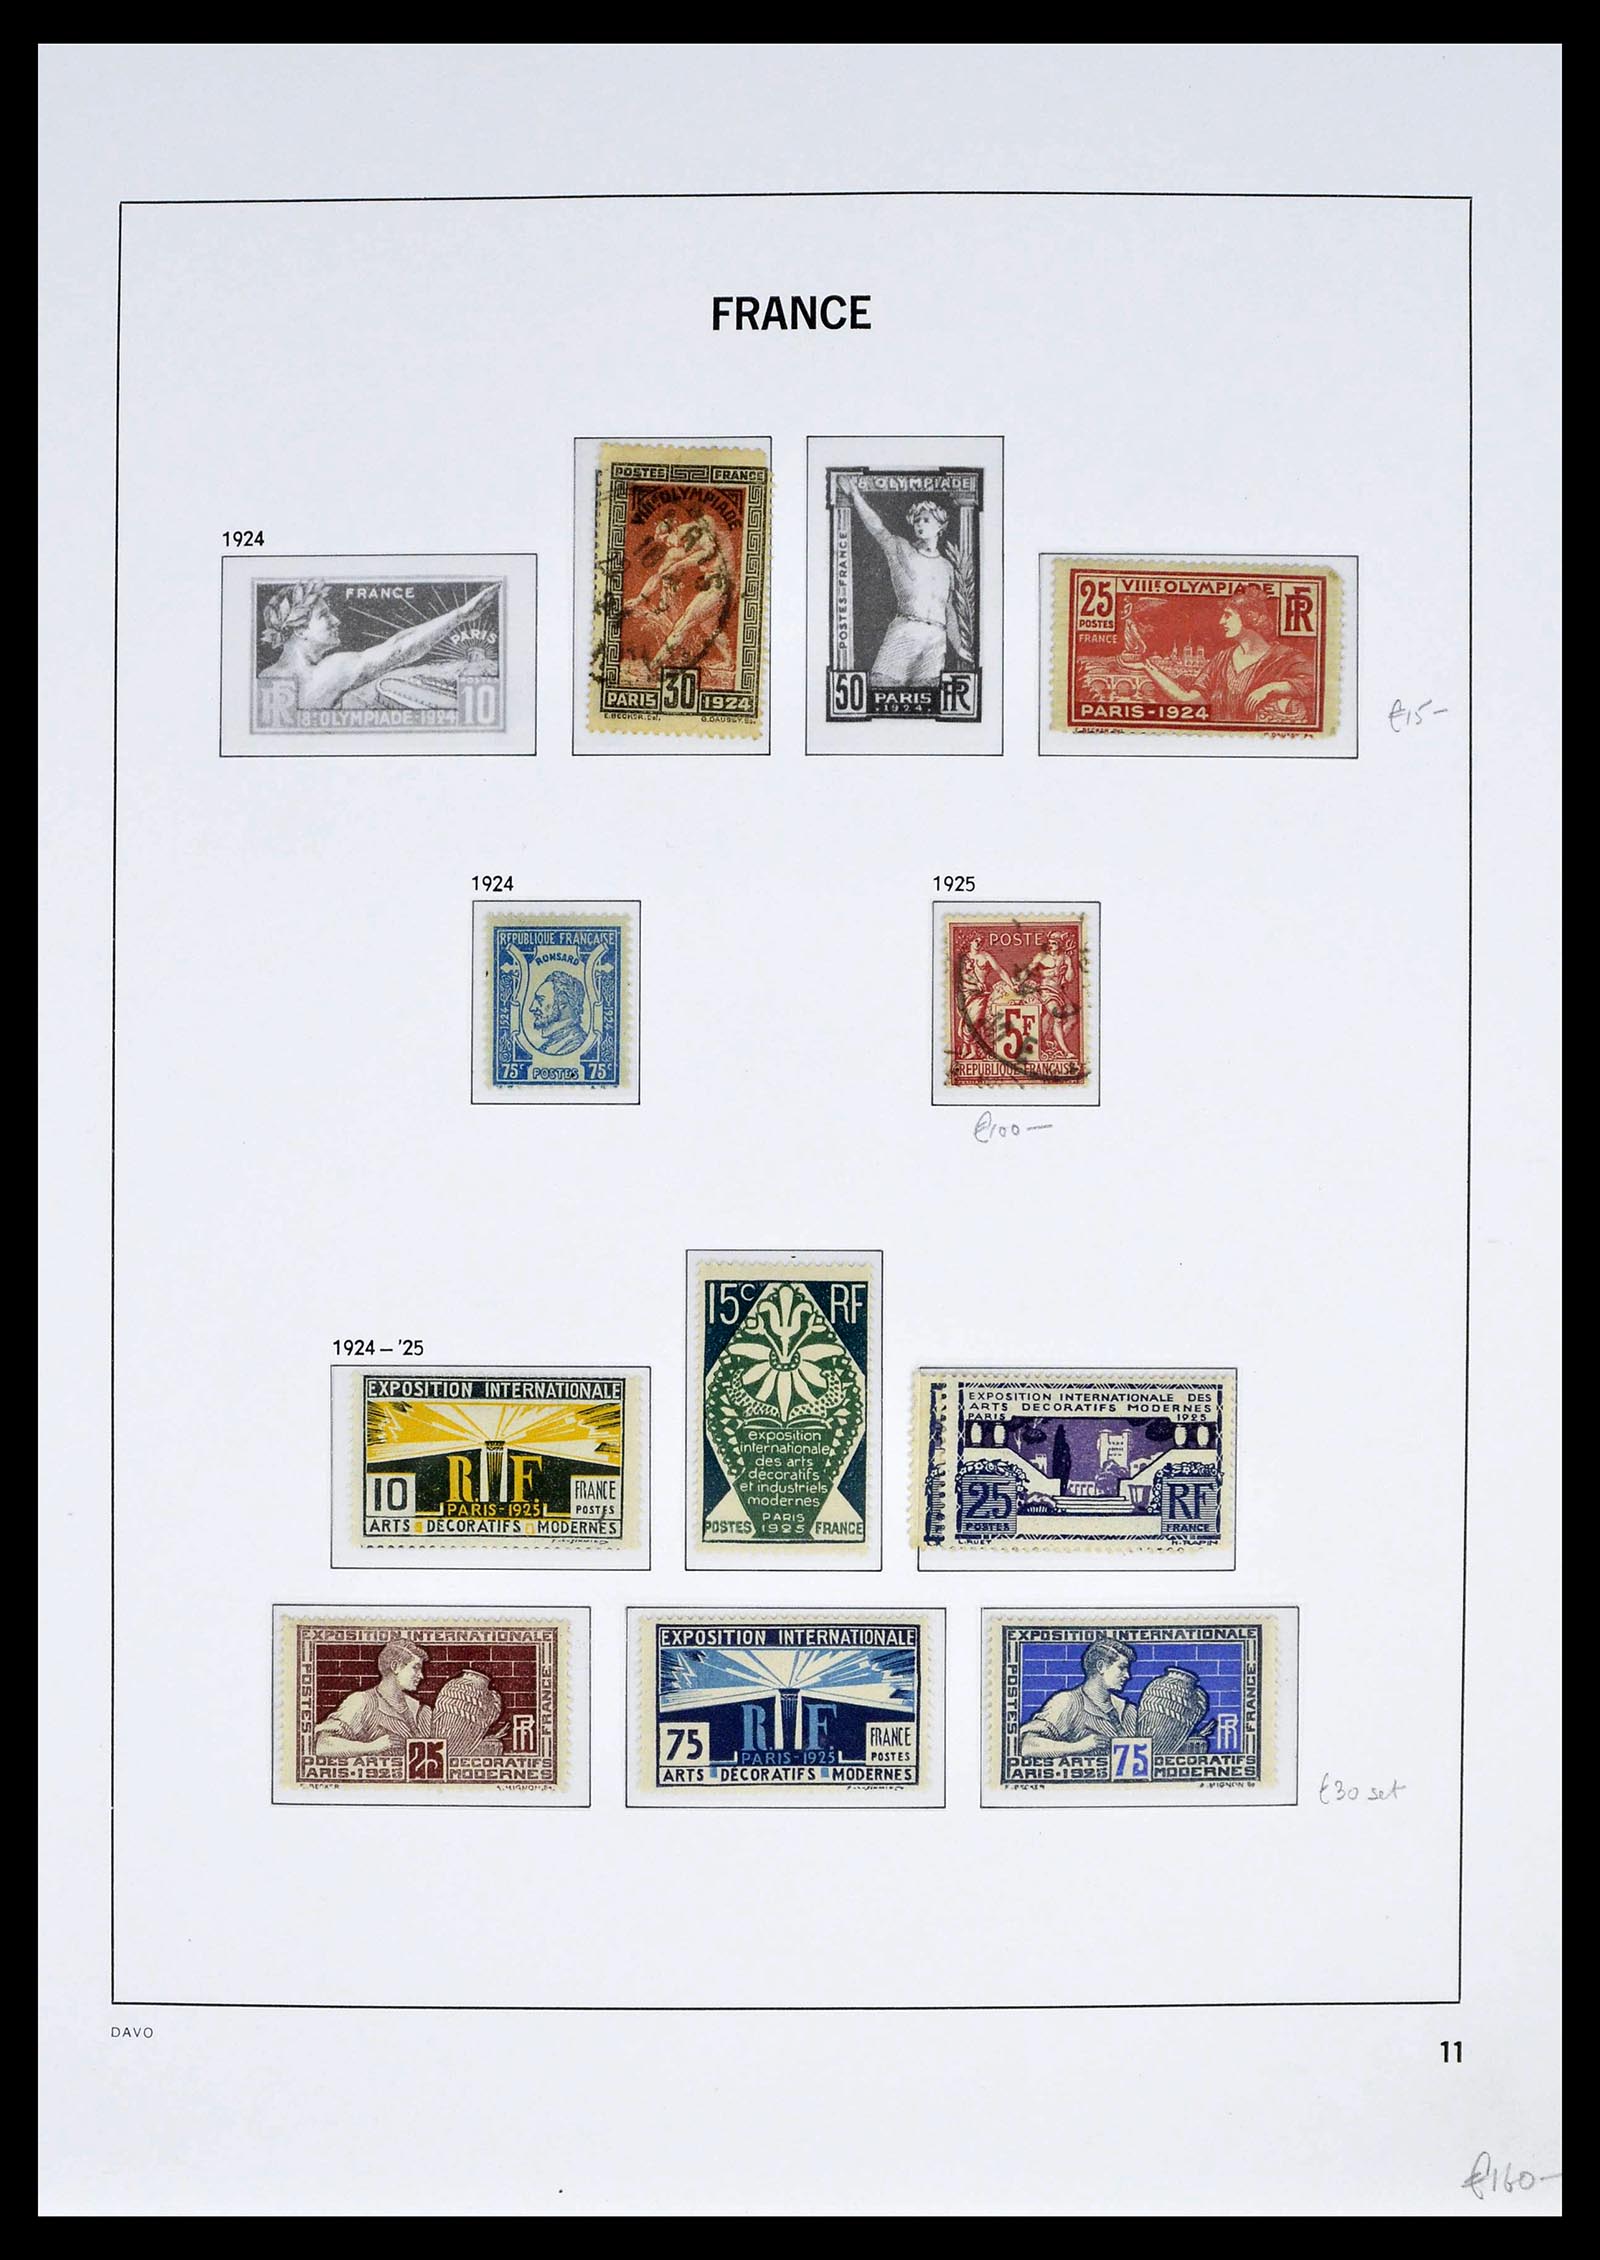 39335 0026 - Stamp collection 39335 France 1849-1969.